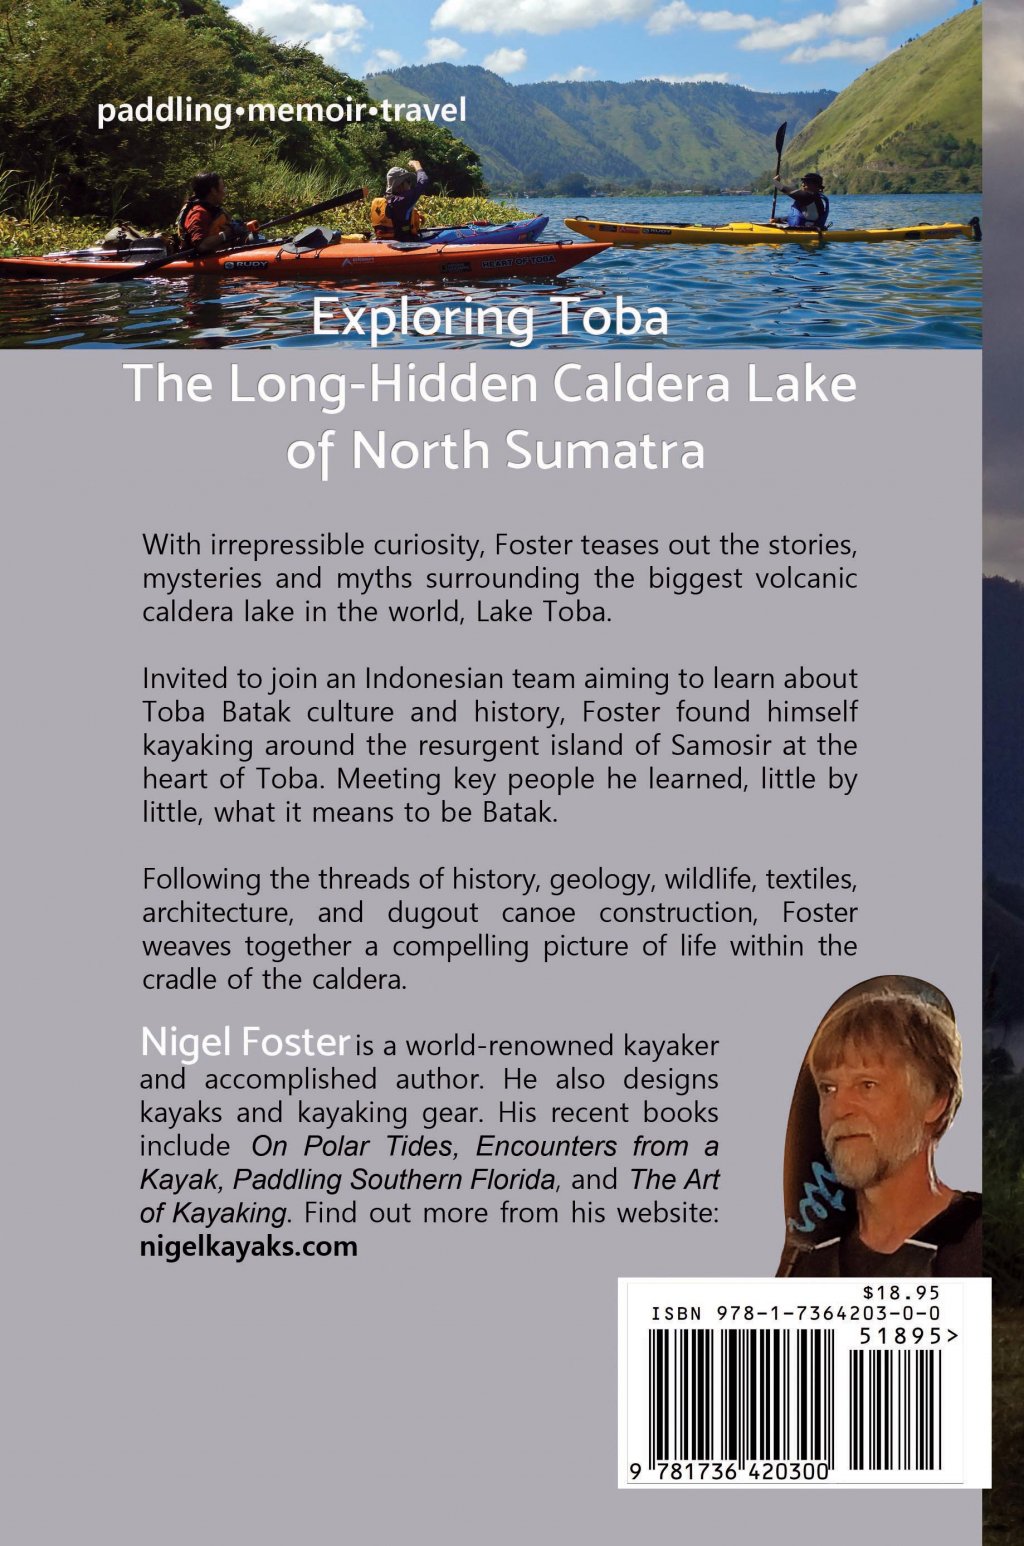 Back cover of book, Heart of Toba, by author Nigel Foster